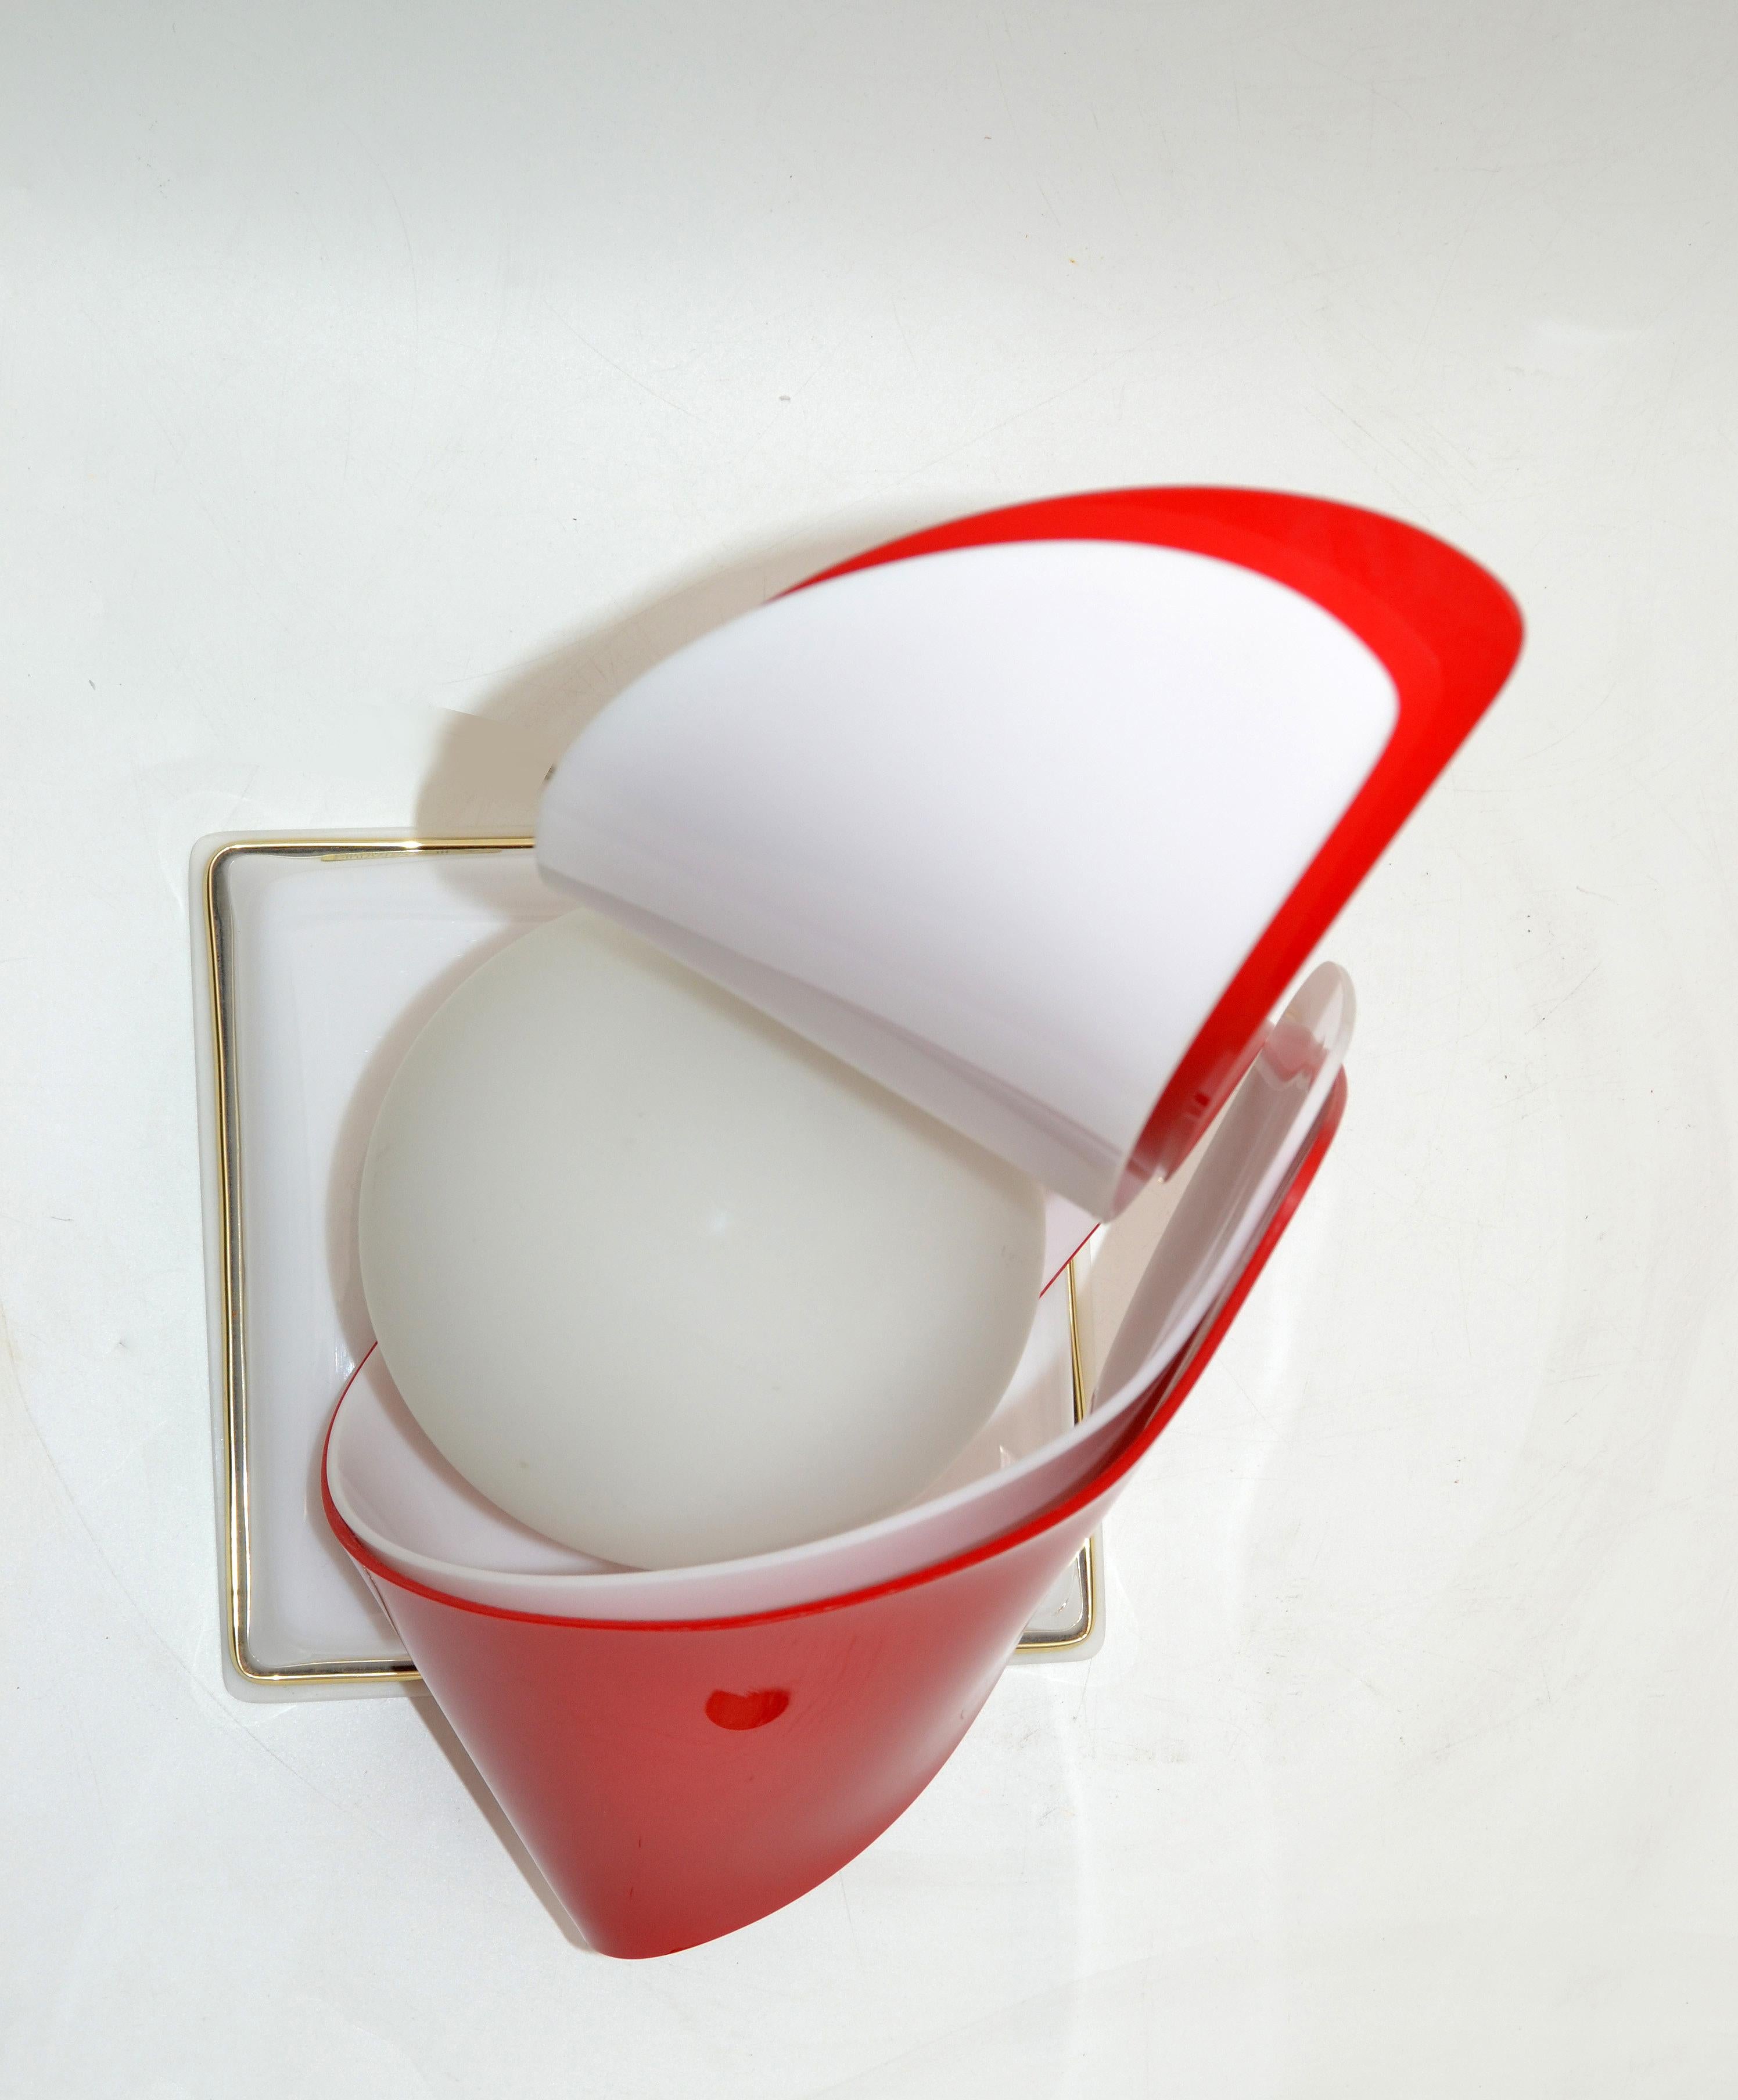 Red & White Acrylic Sculptural Table Lamp by Acrylic Design White Opaline Glass In Good Condition For Sale In Miami, FL